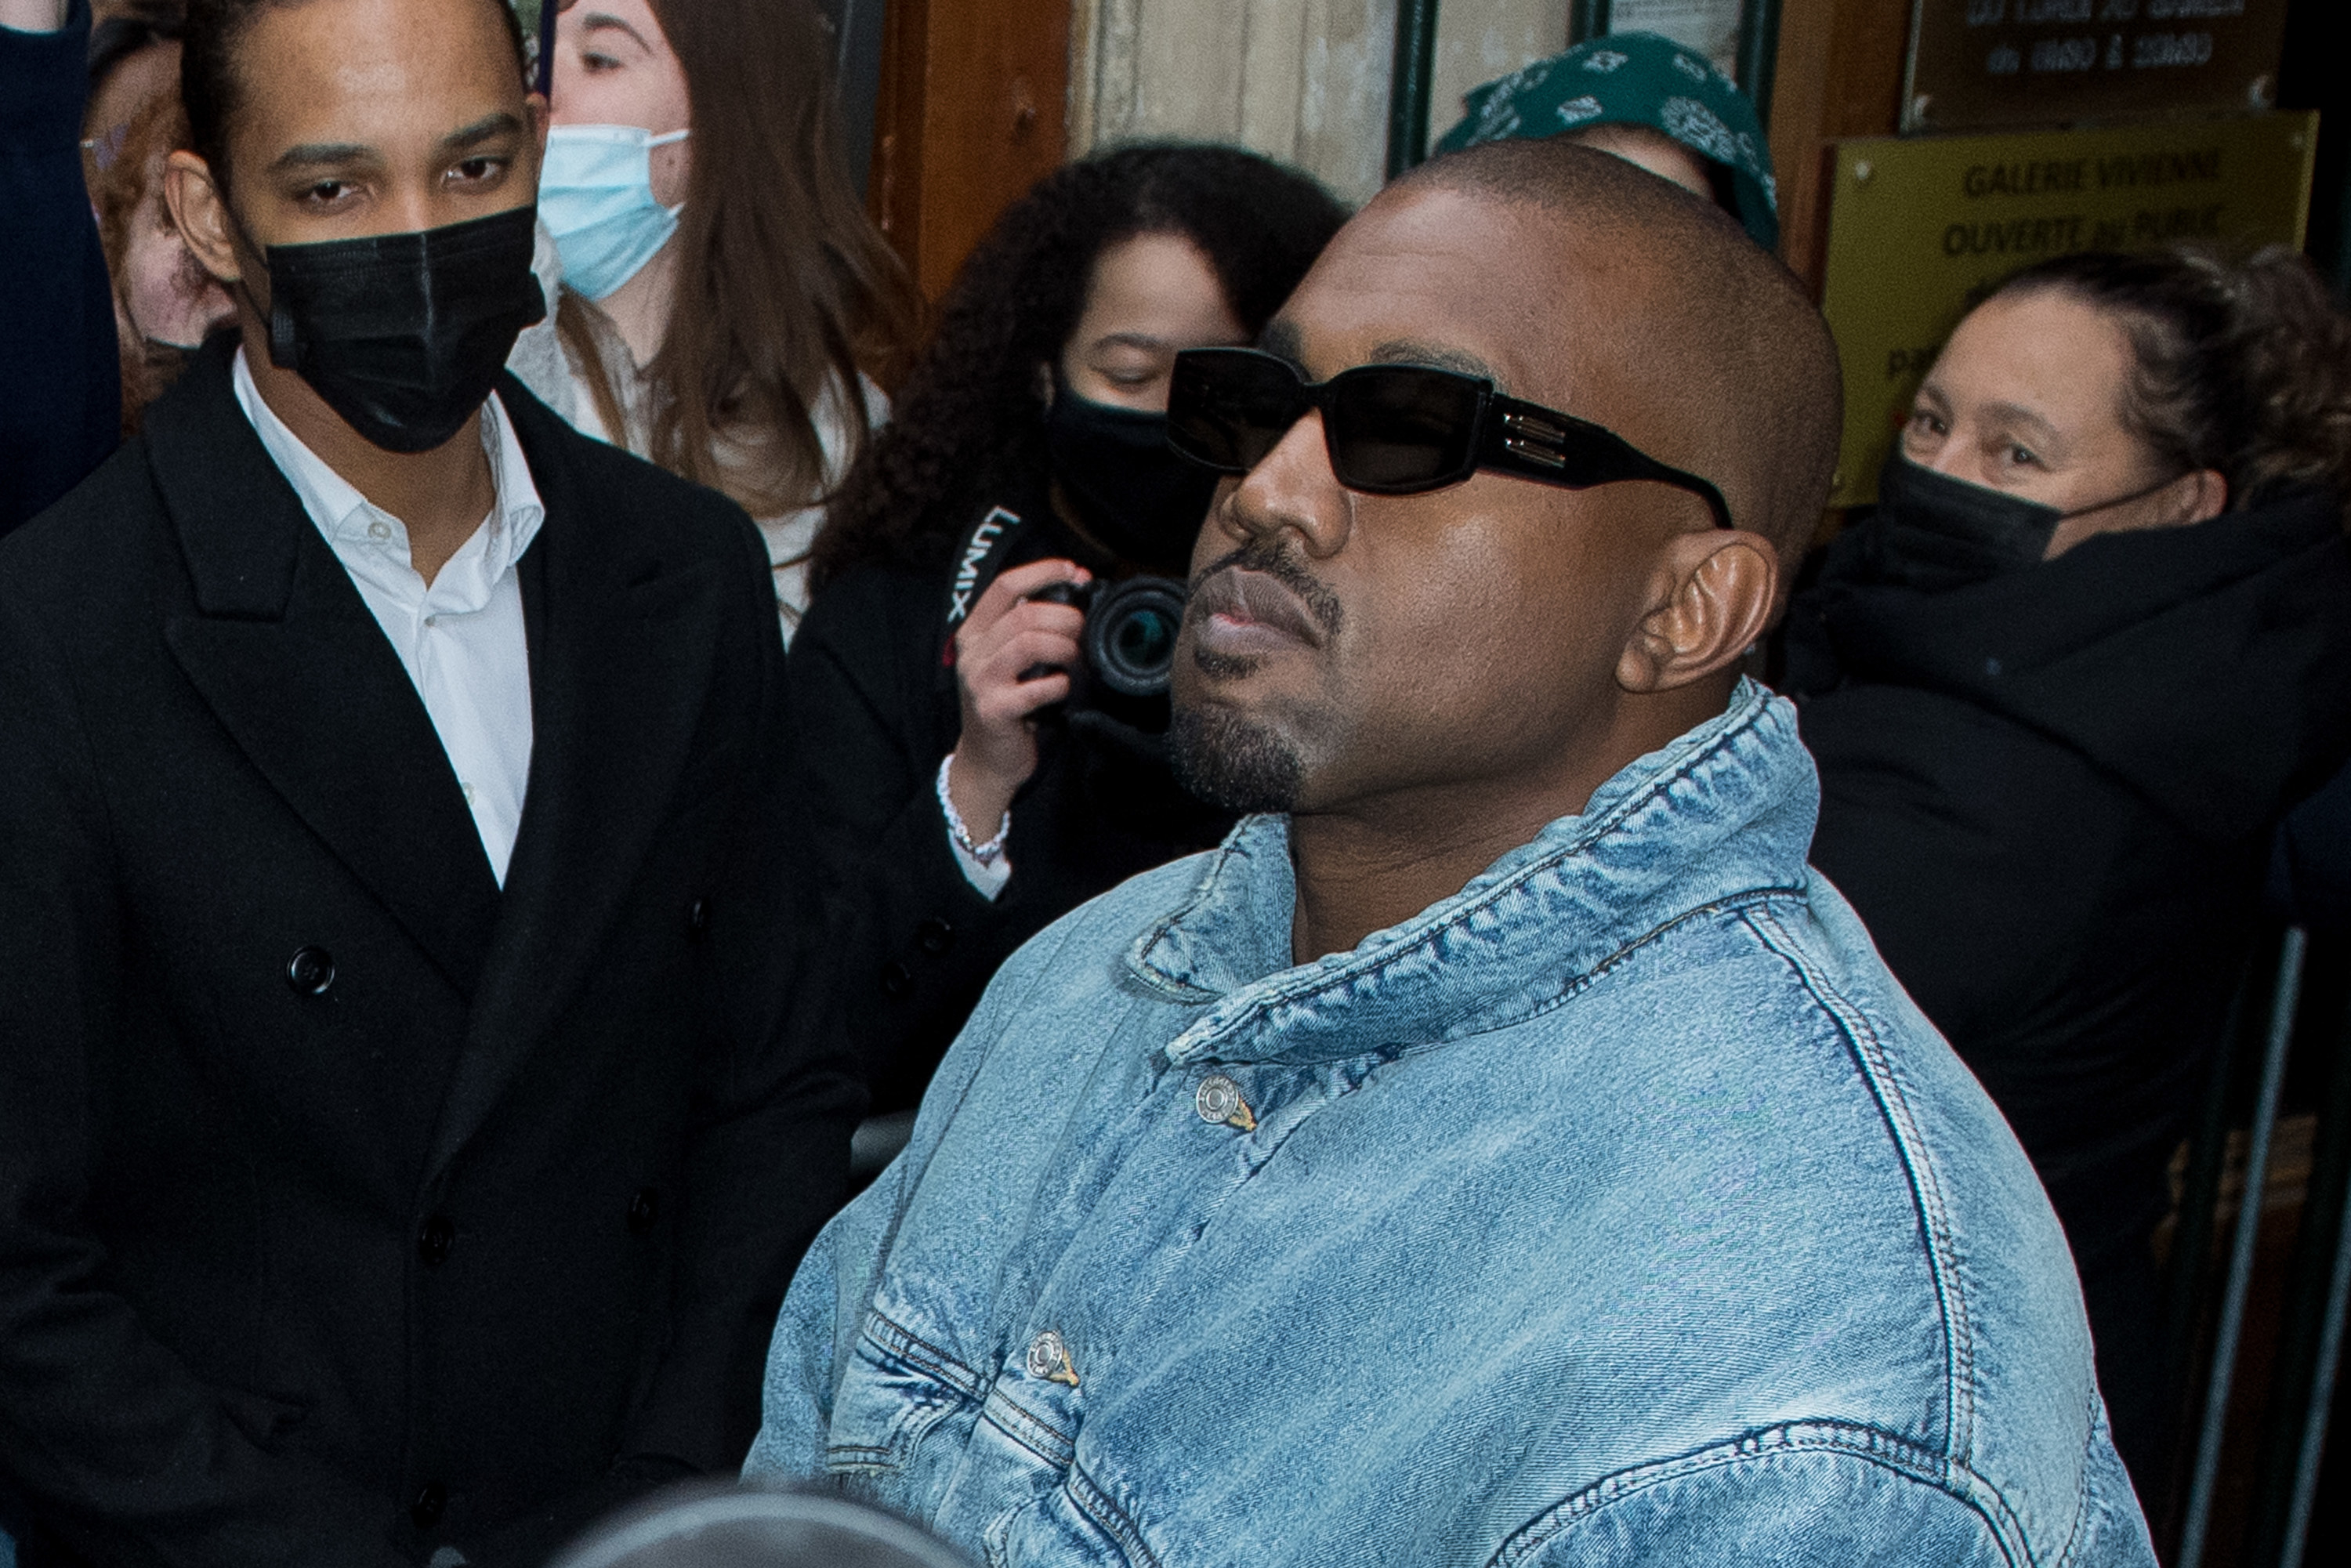 Ye in sunglasses and a jeans jacket with masked people behind him